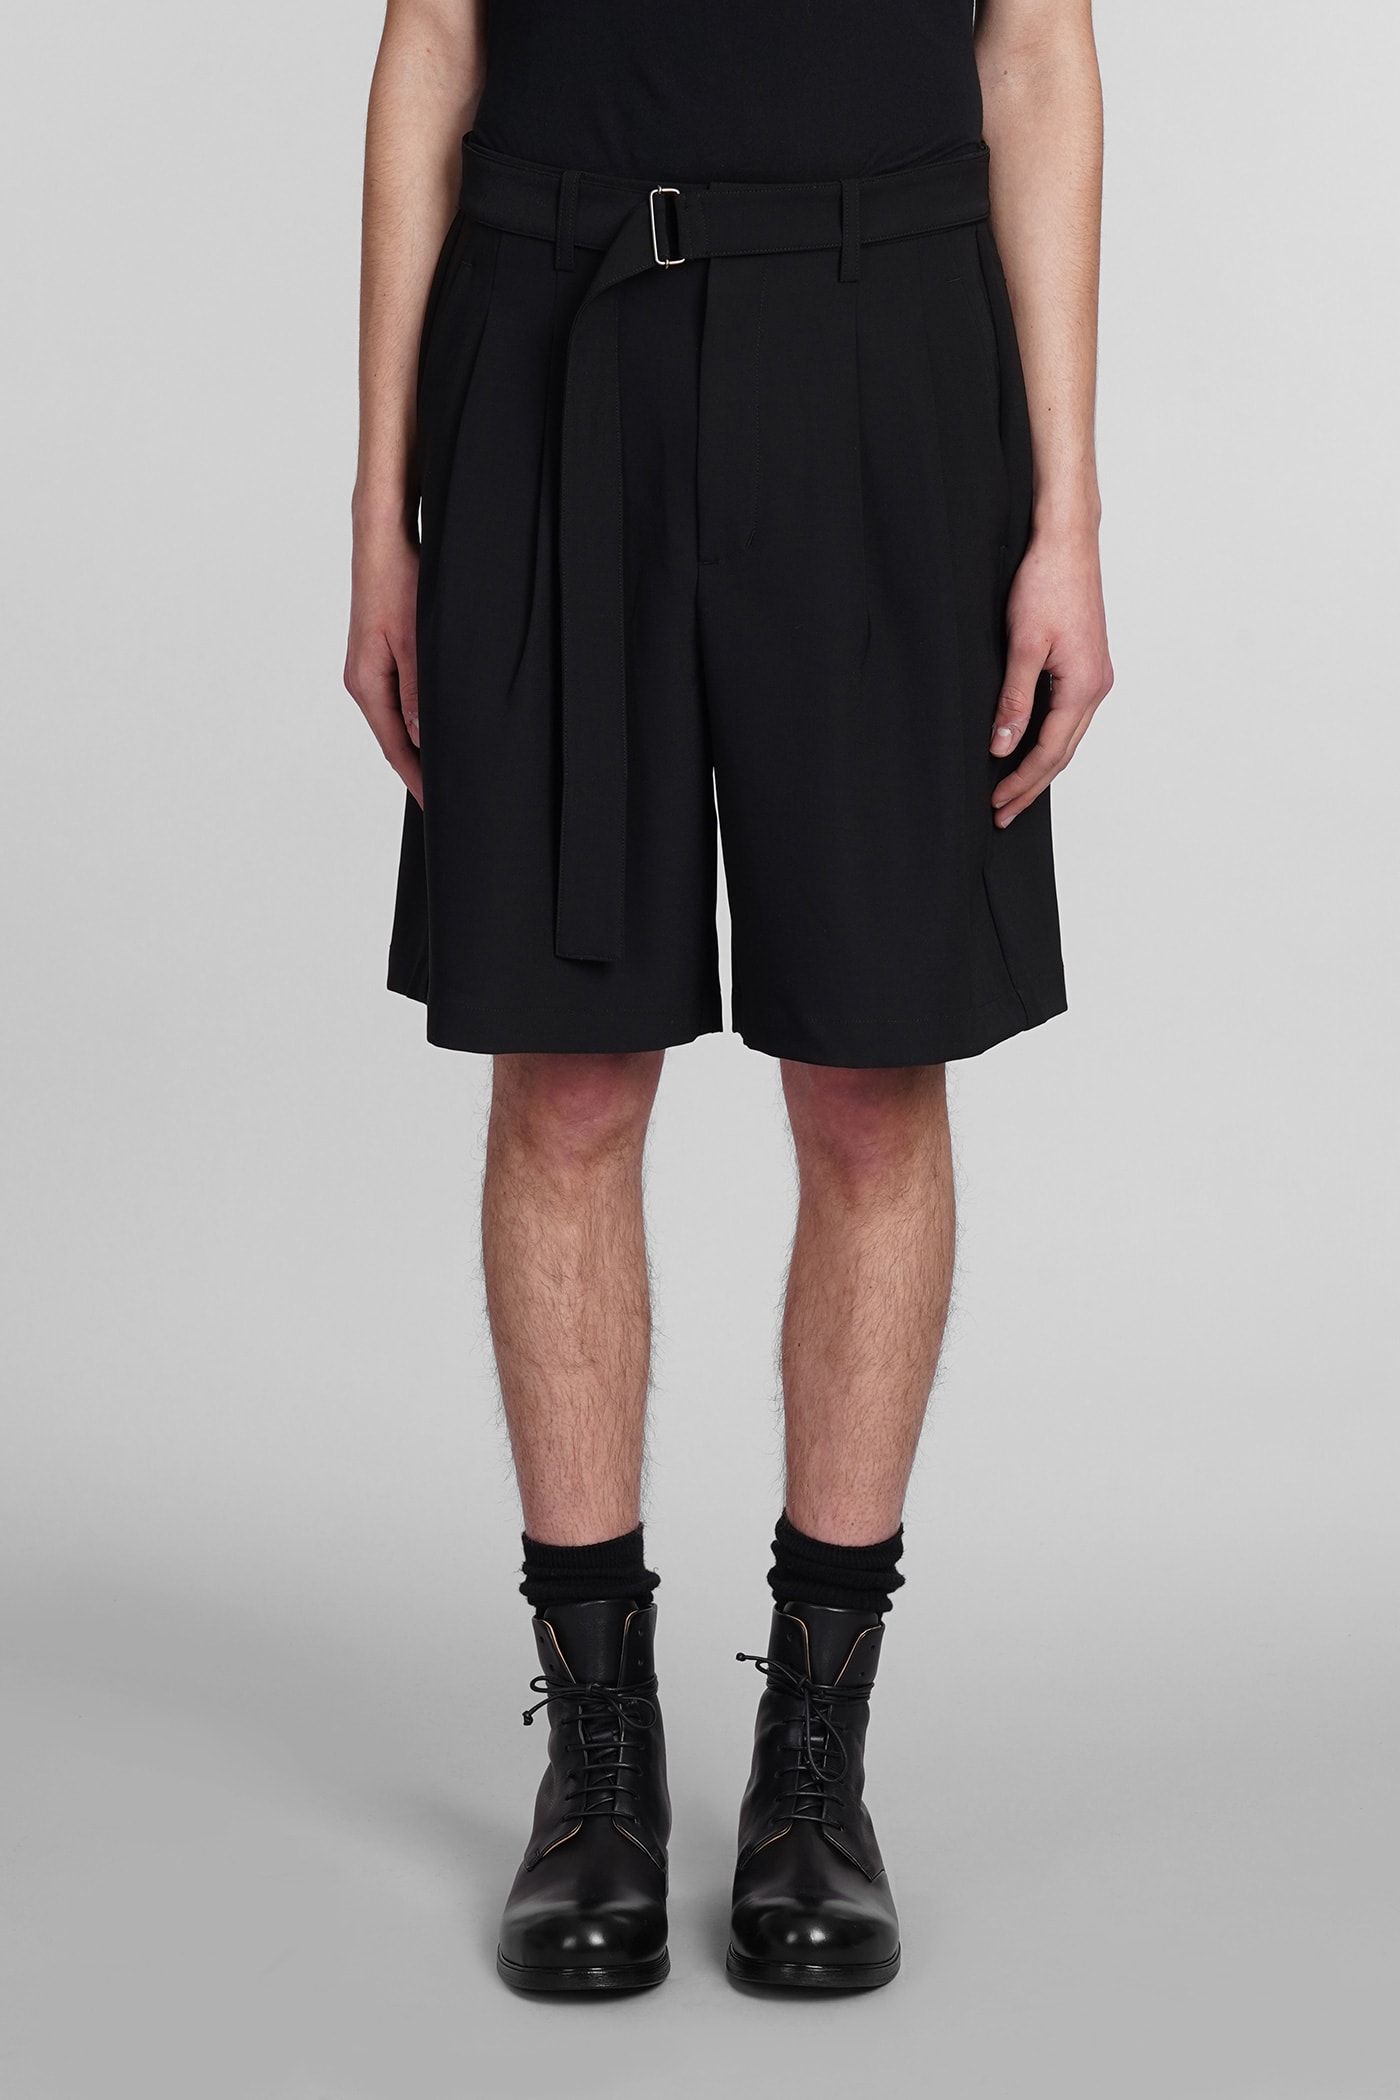 ATTACHMENT SHORTS IN BLACK POLYESTER